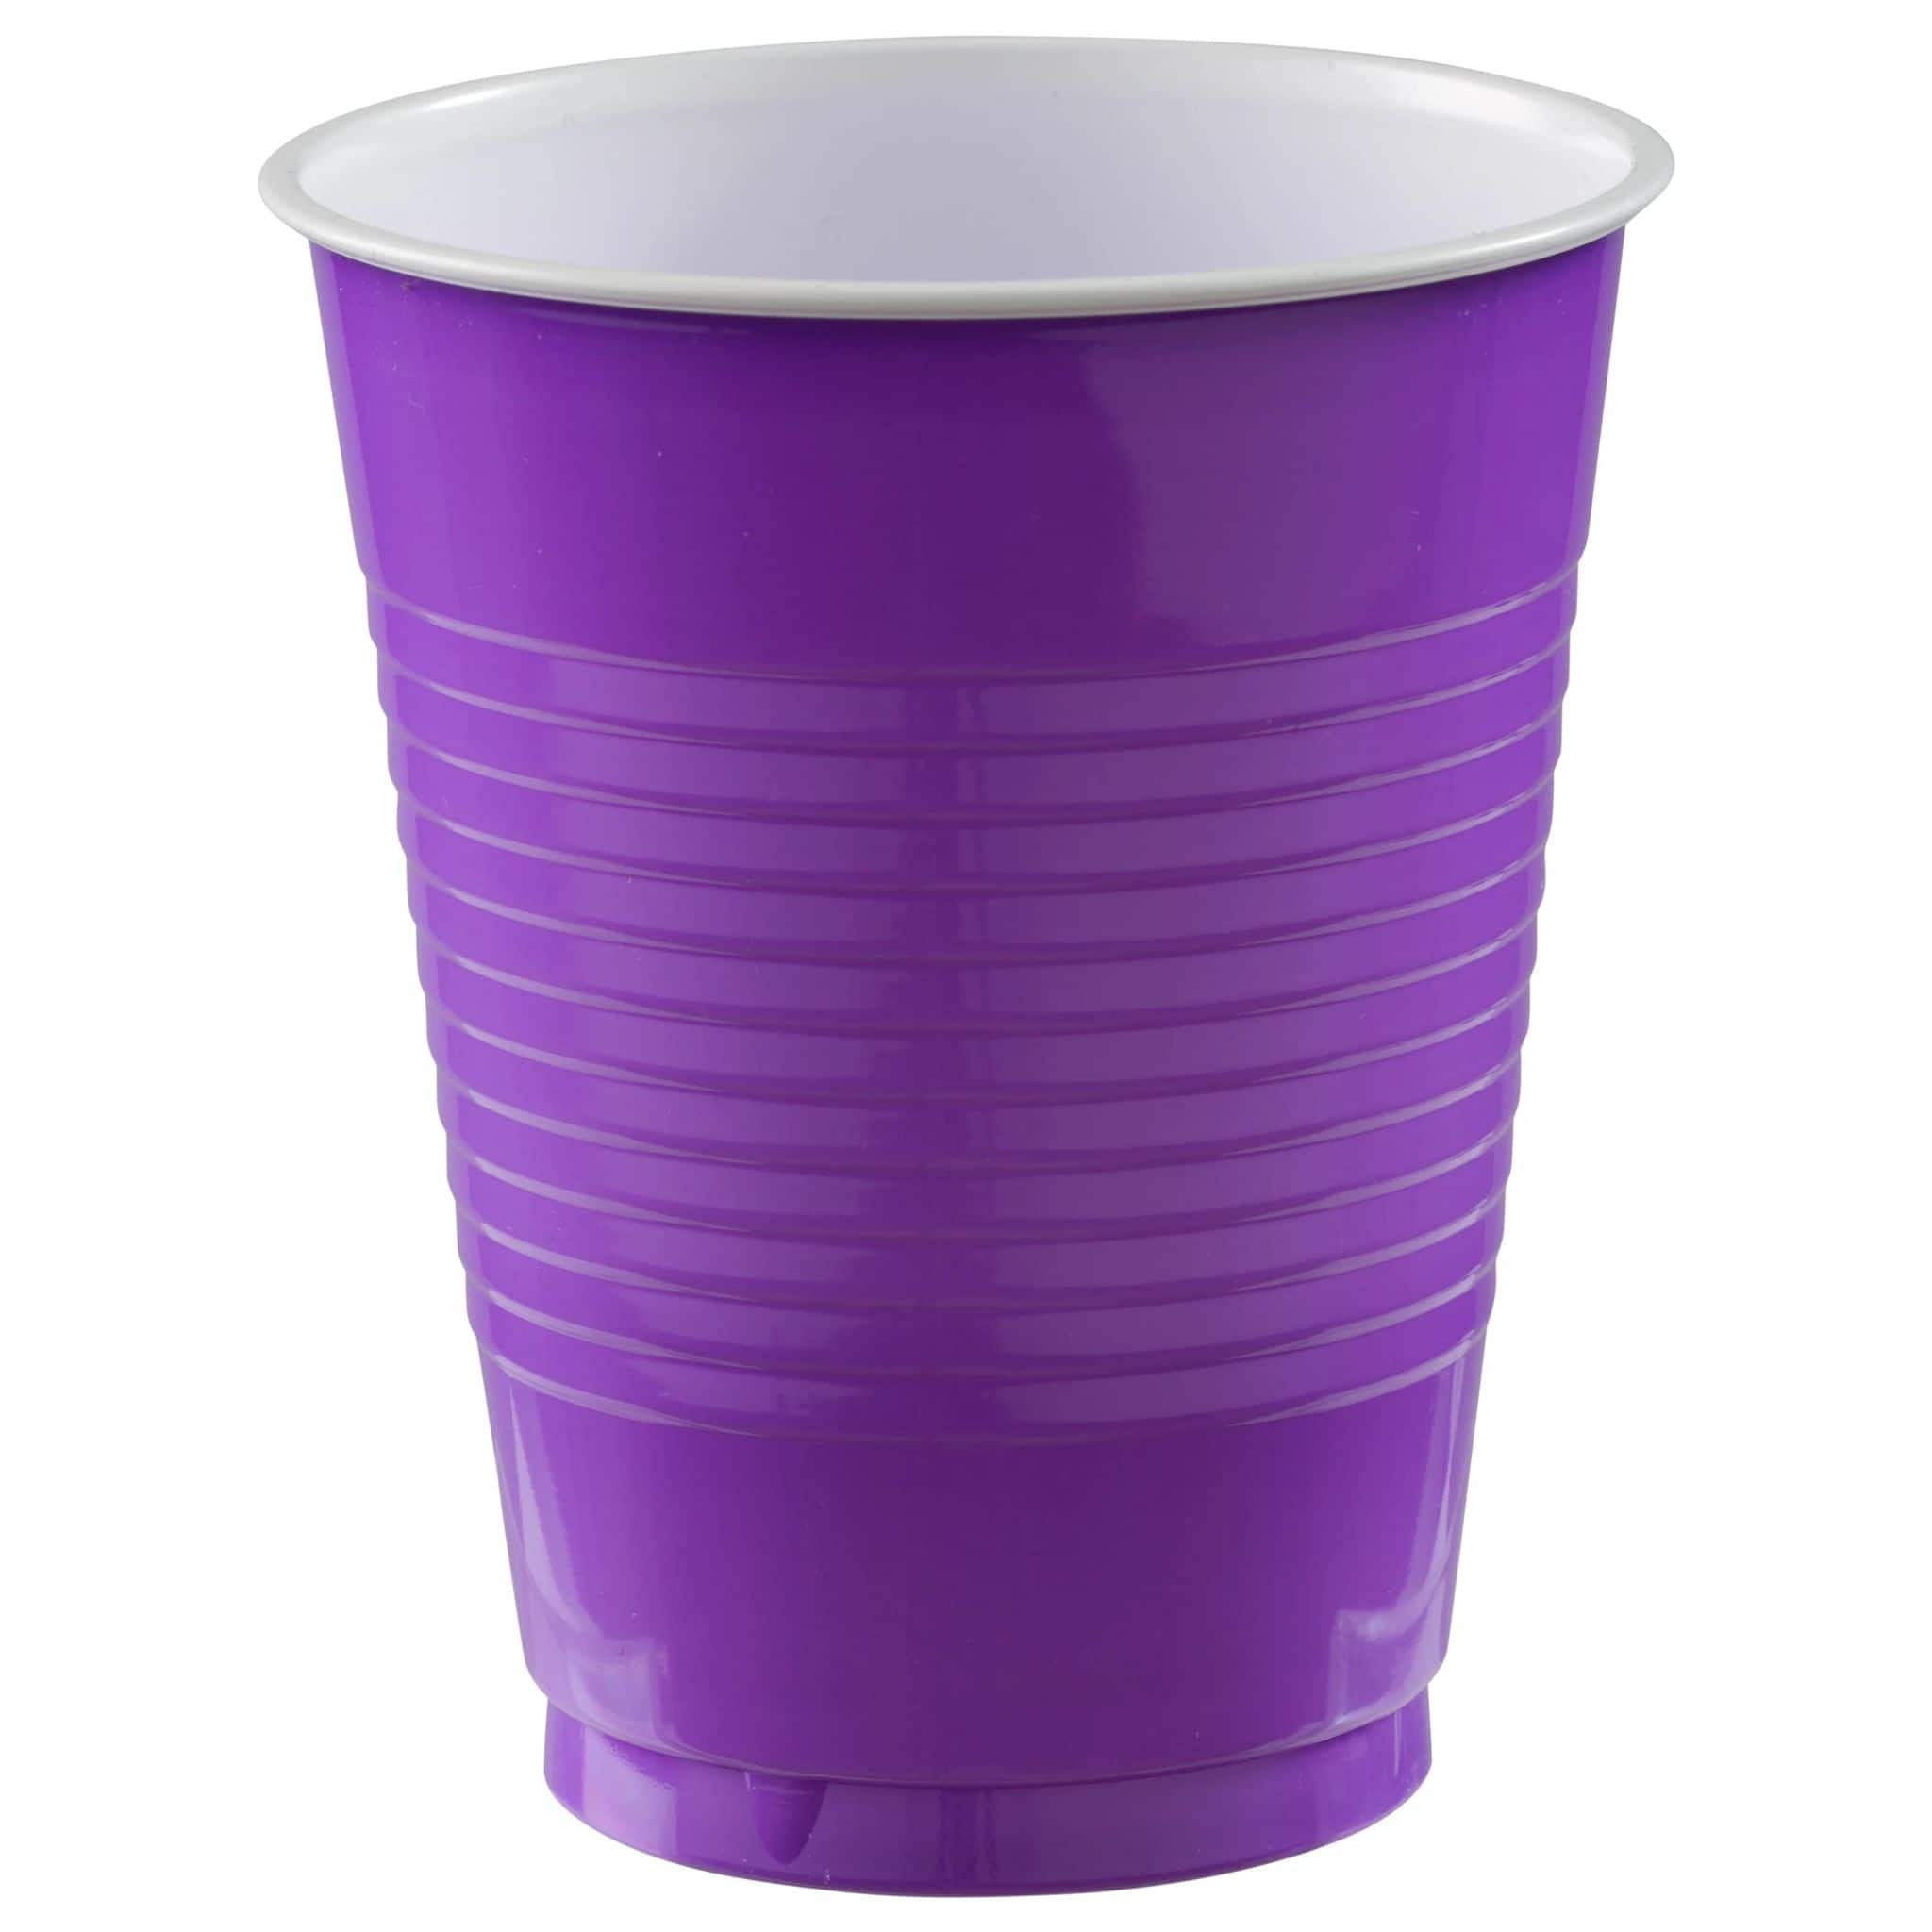 18 OZ PARTY CUP, Cups